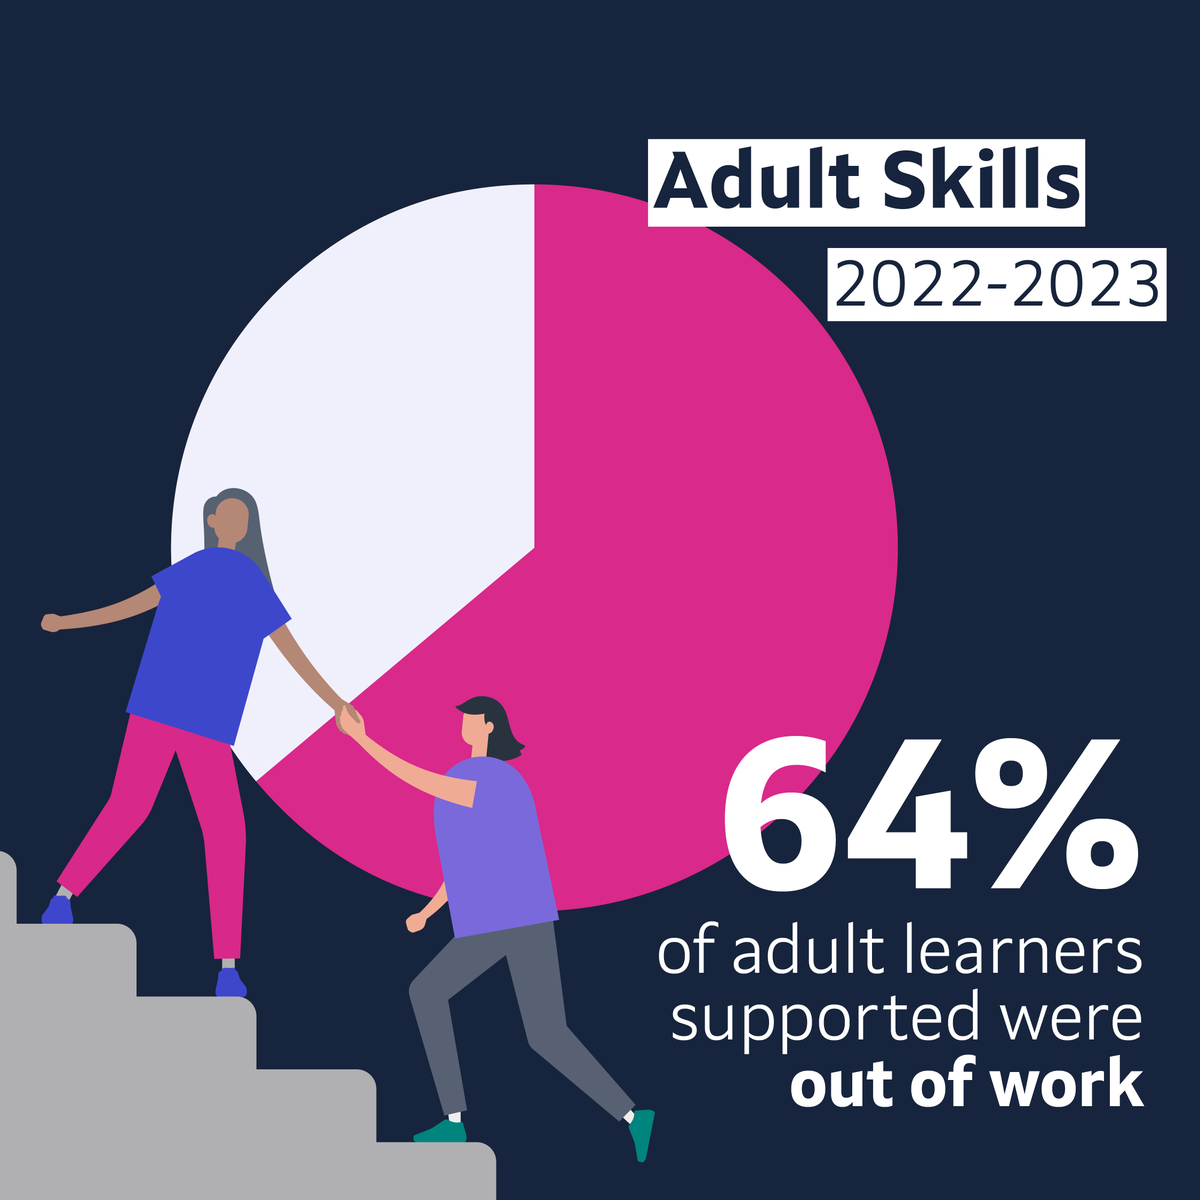 We’re investing £66 million a year to help adults in West Yorkshire build the skills they need to find and stay in work, an apprenticeship or other further learning. Read about the progress we’re making here: ➡️ ow.ly/B7re50QVnPL